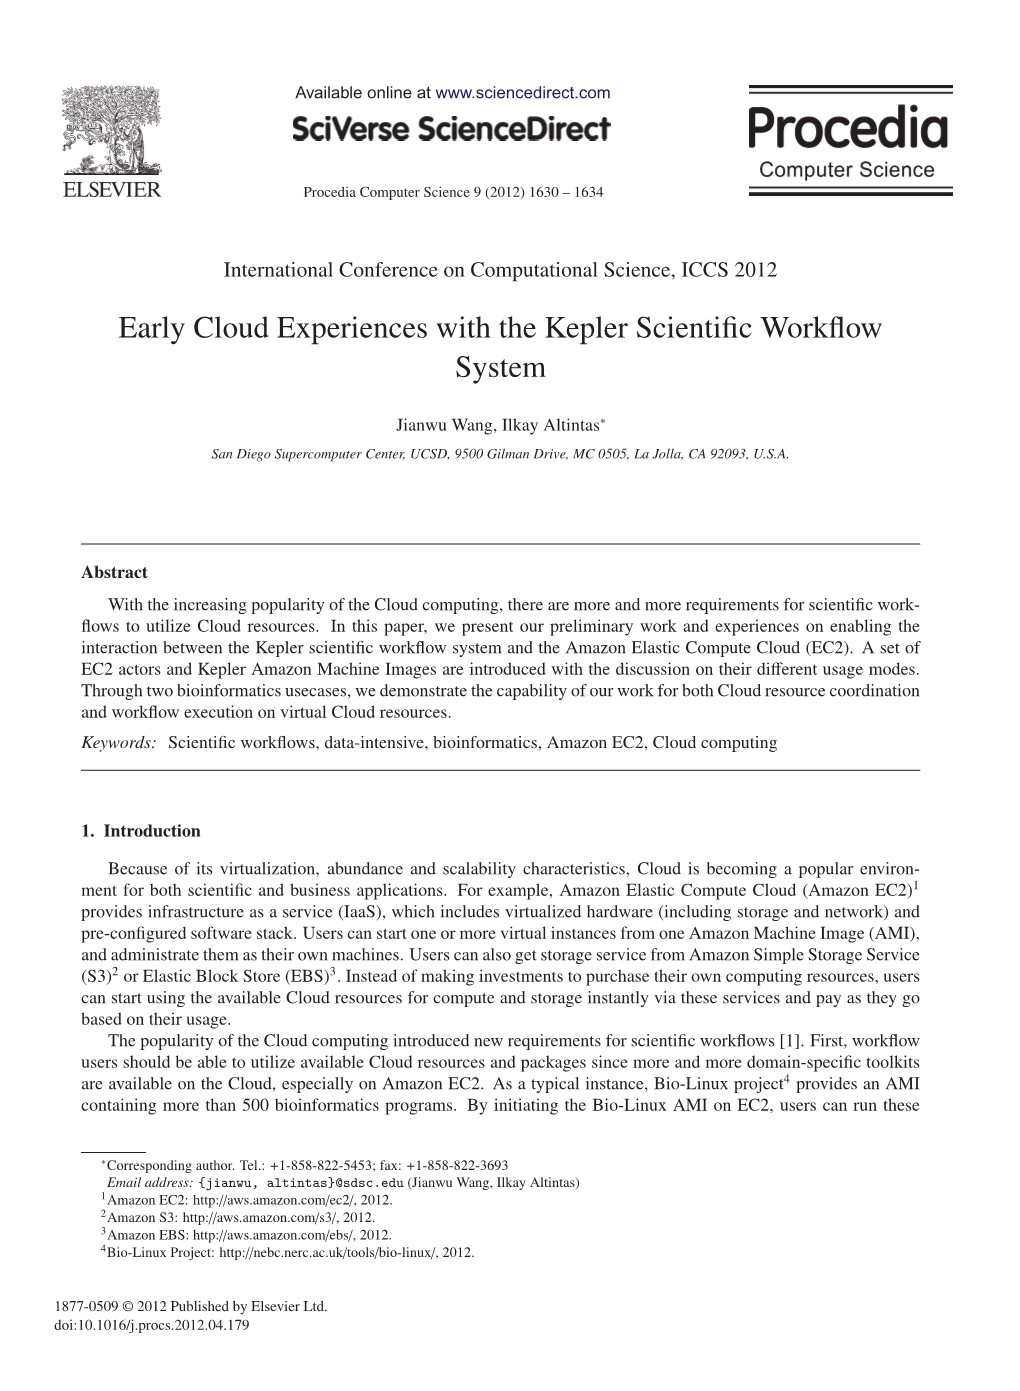 Early Cloud Experiences with the Kepler Scientific Workflow System